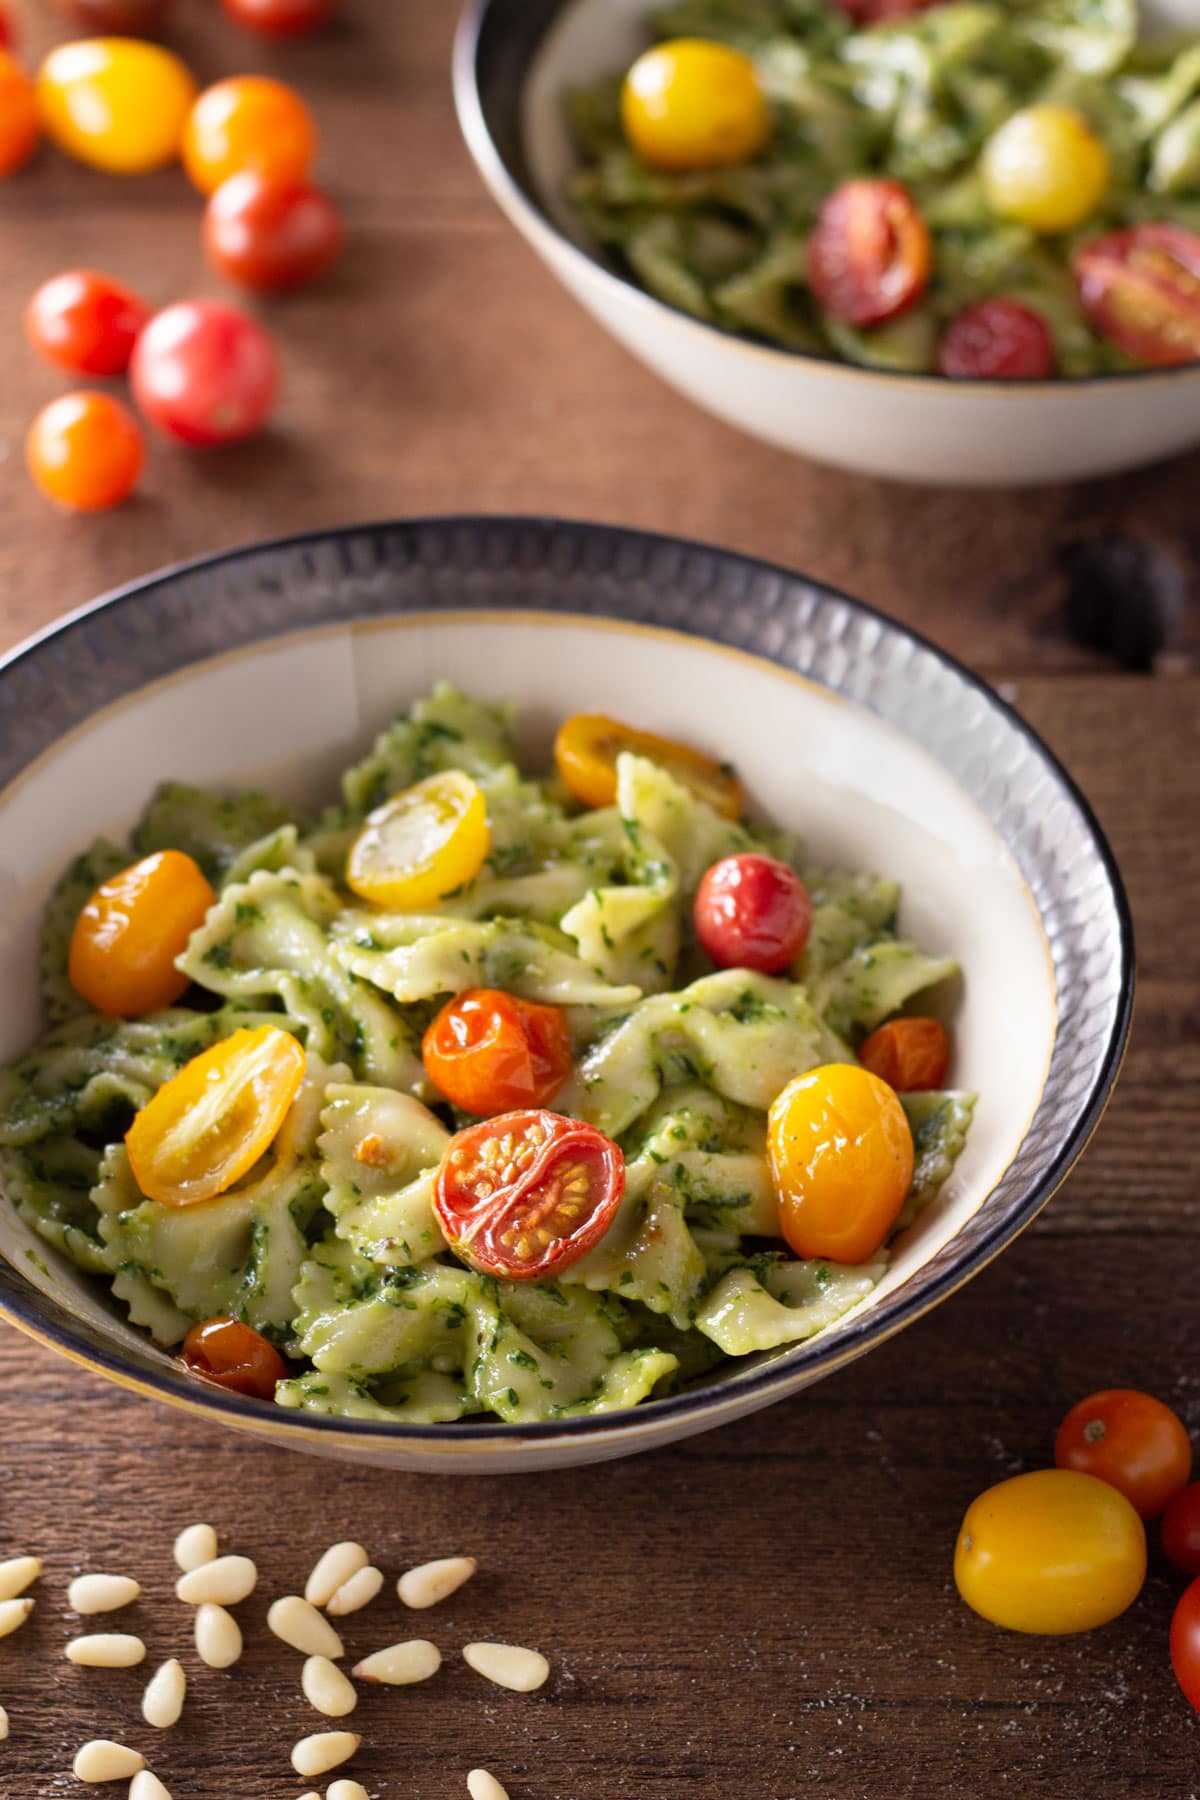 Angled view of a bowl of farfalle pasta with pesto sauce and roasted tomatoes on a wood surface.